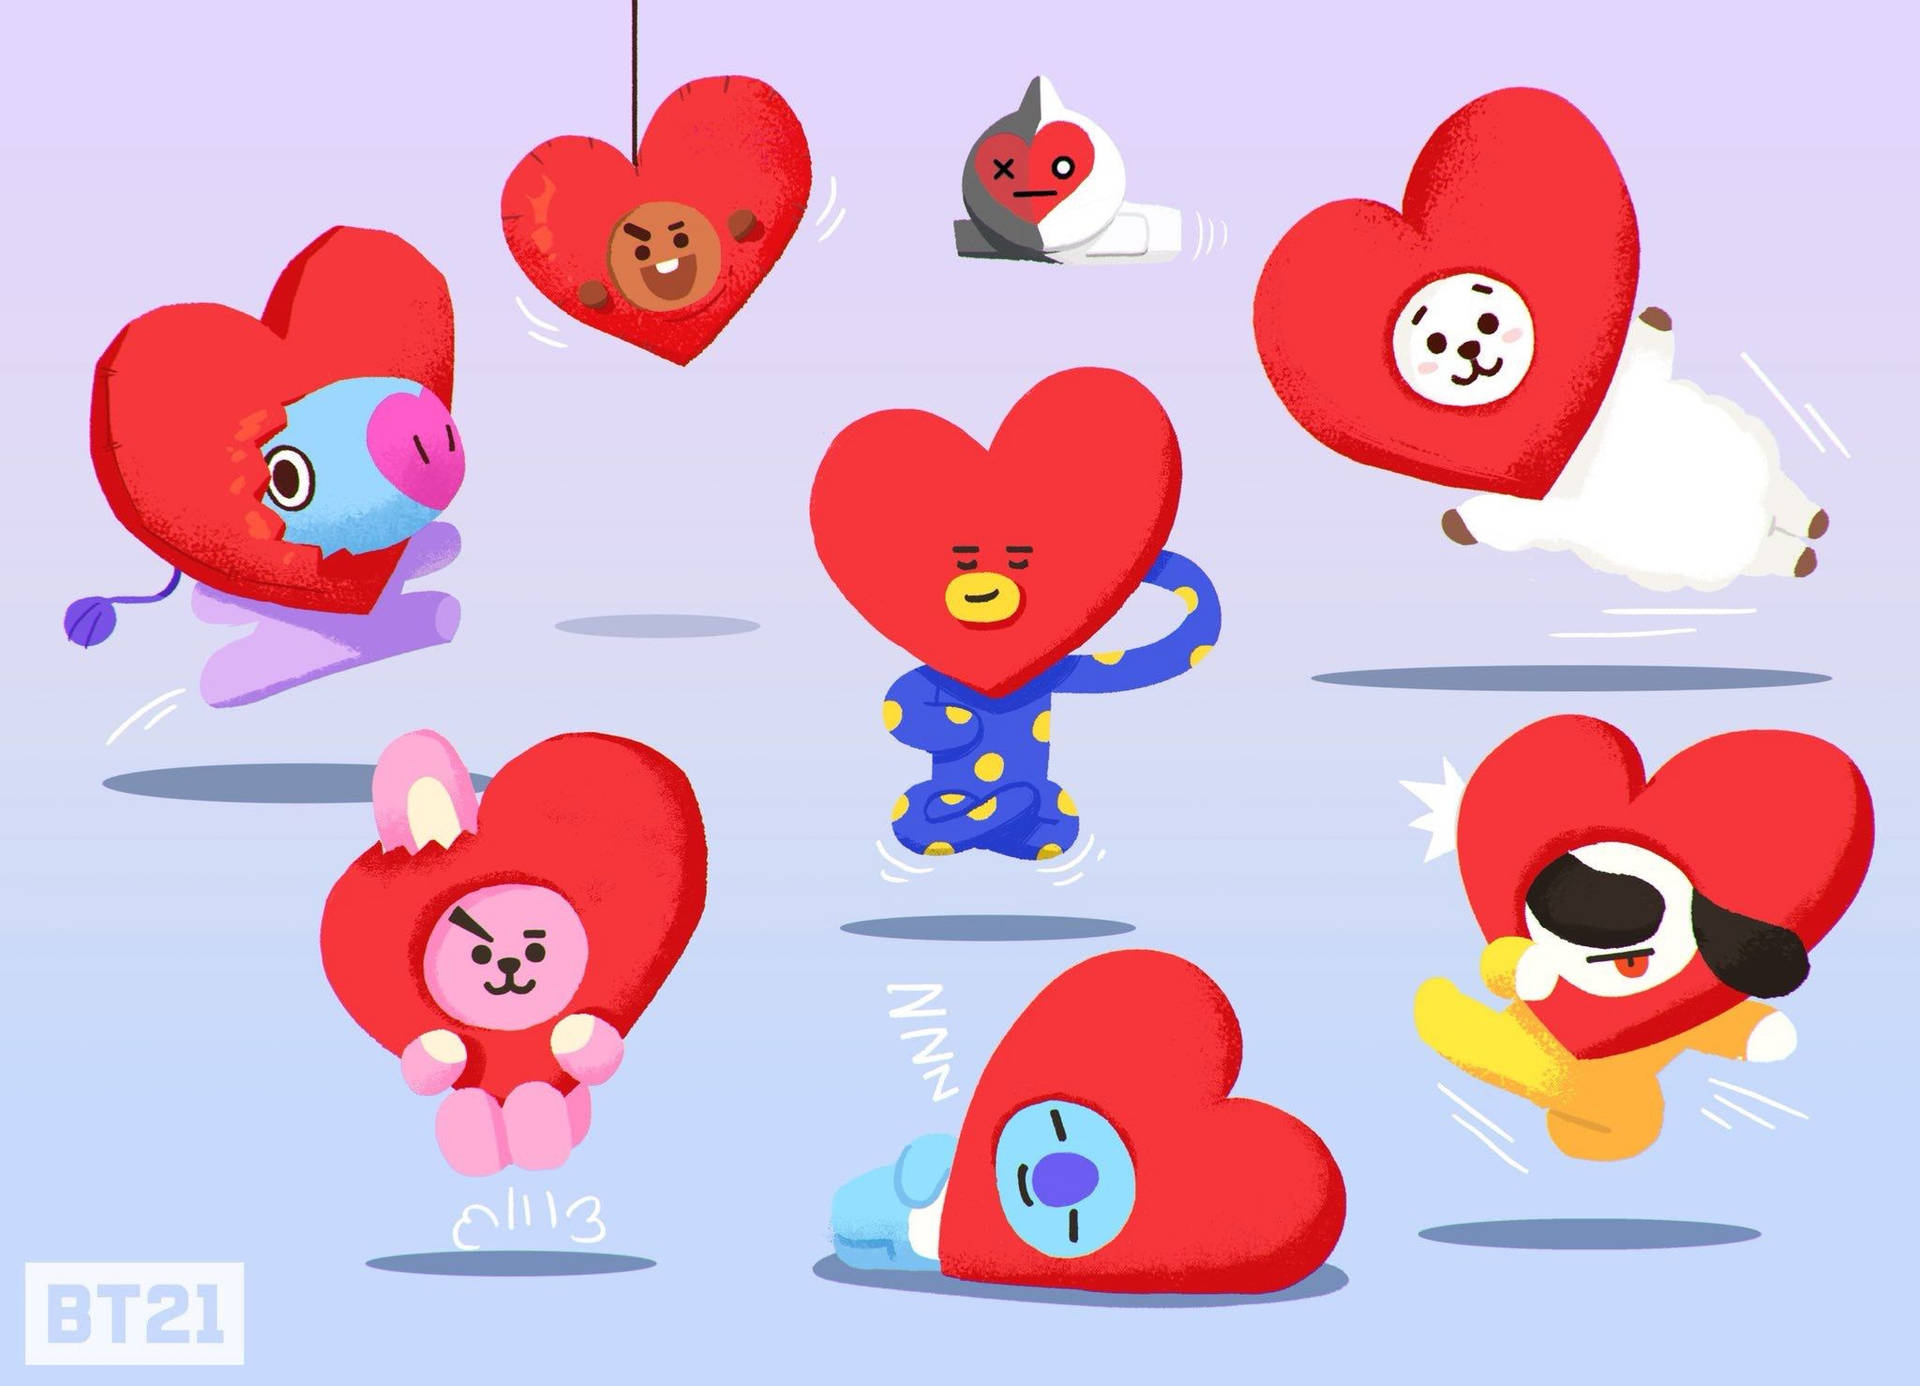 100+] Tata Bt21 Wallpapers For Free | Wallpapers.Com